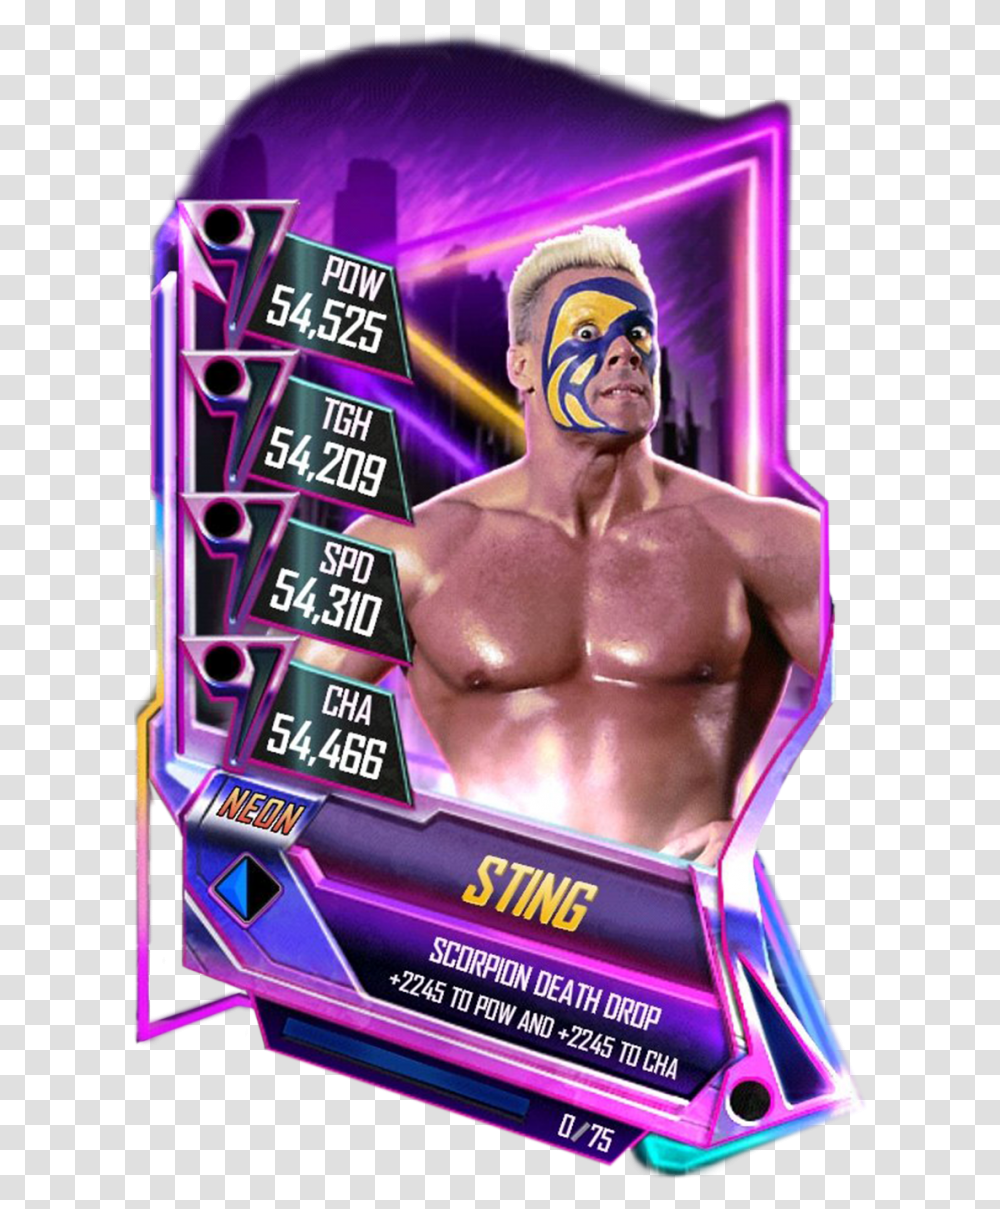 Sting S5 23 Neon Peyton Royce Wwe Supercard, Person, Human, Paper, Flyer Transparent Png